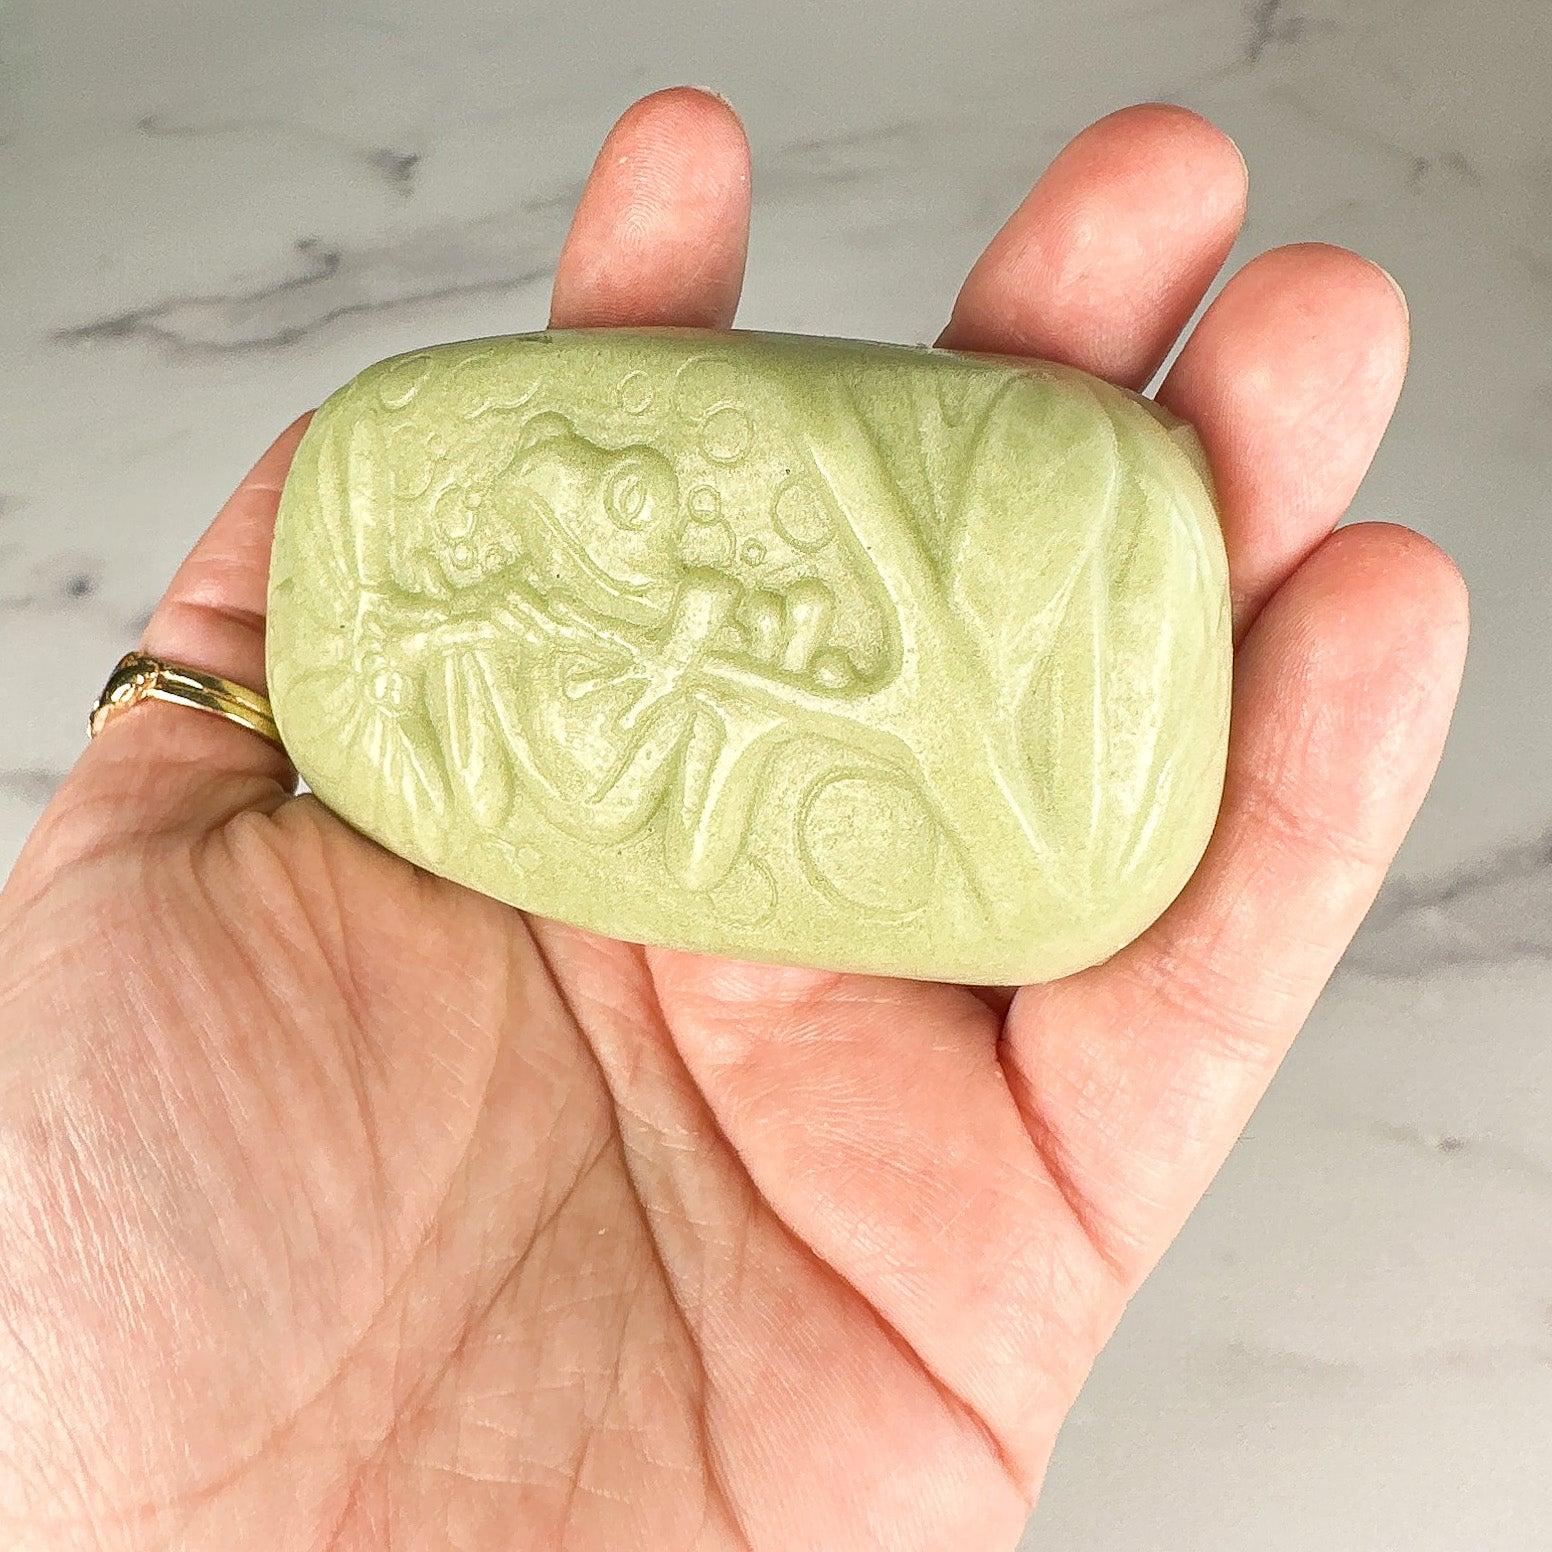 Tree Frog and Flower Soap Bar - The Serpentry